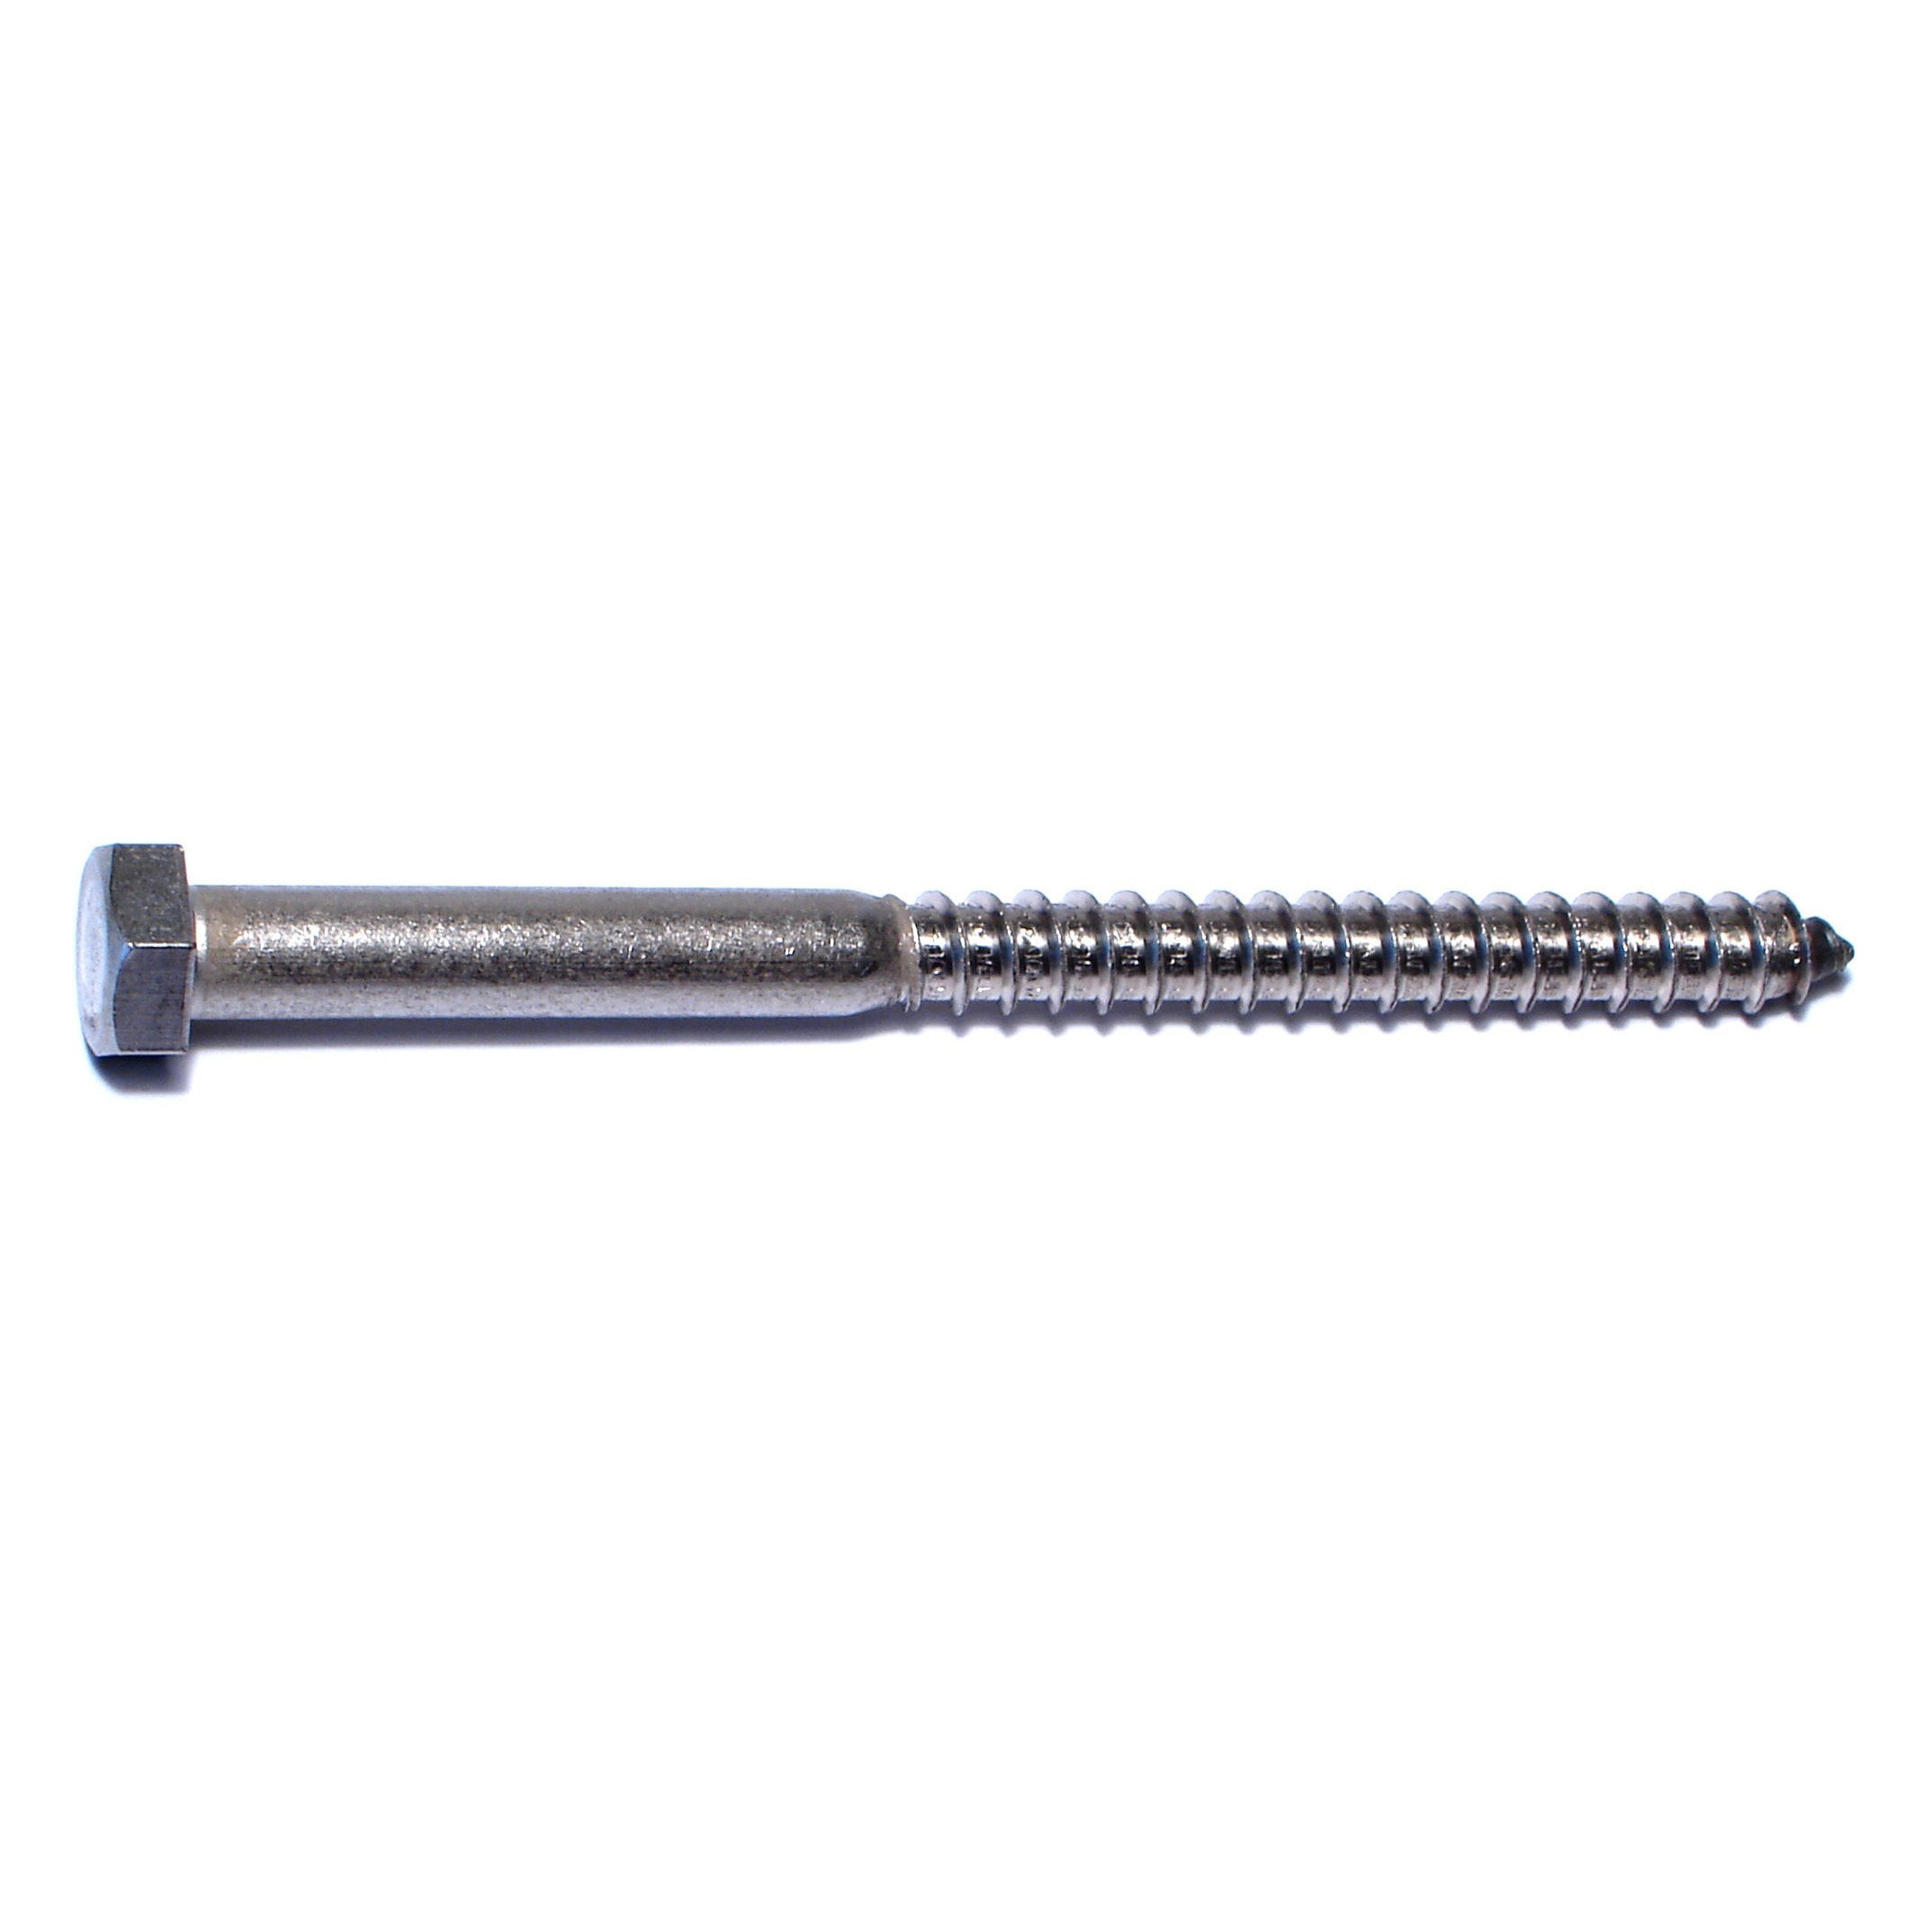 3/8 x 5" Stainless Steel Hex Lag Screws ** Builders Stainless ** Qty 10 